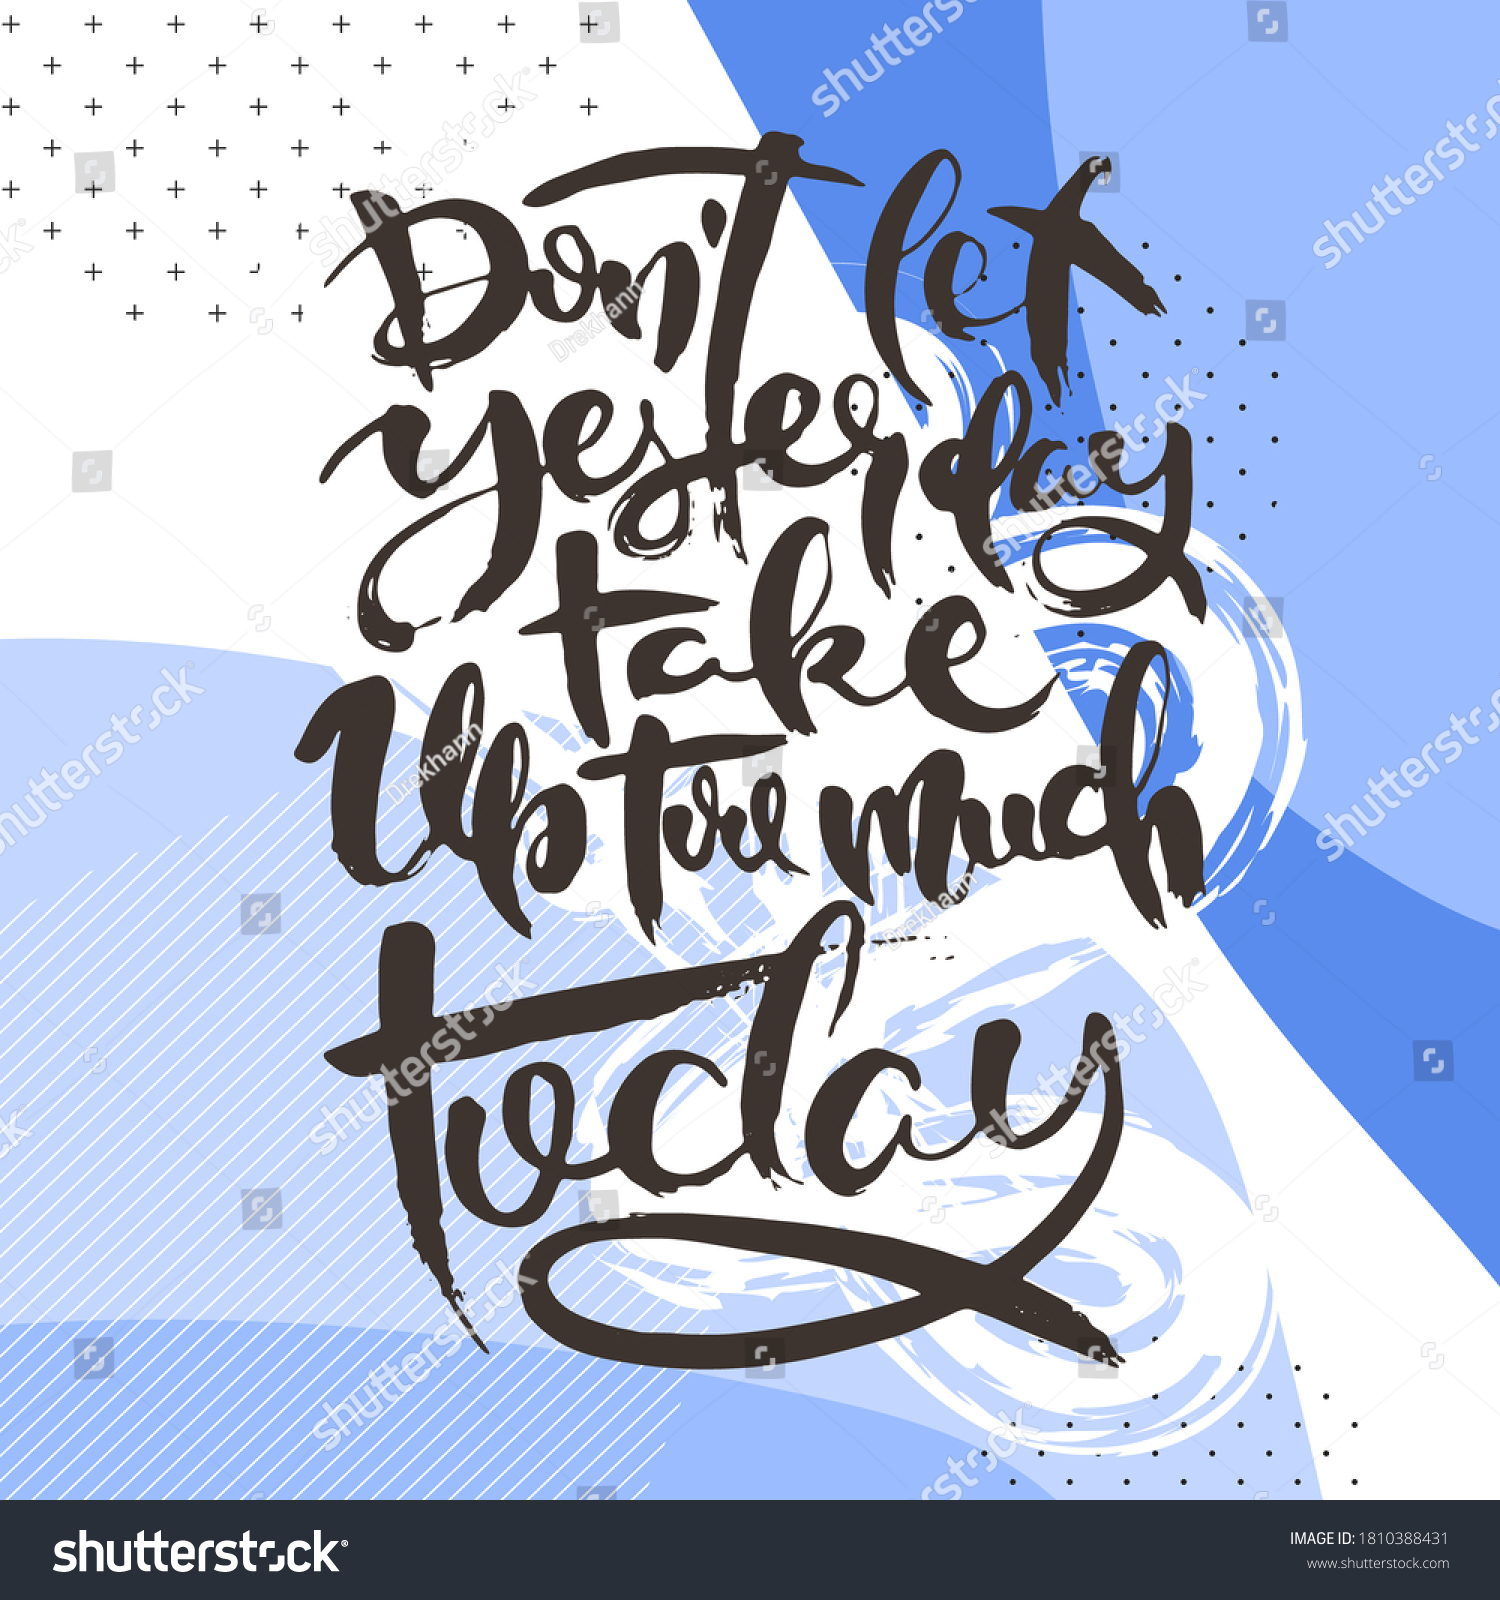 1 Quotable MX23FV MX23 Magnet-Dont Let Yesterday. 